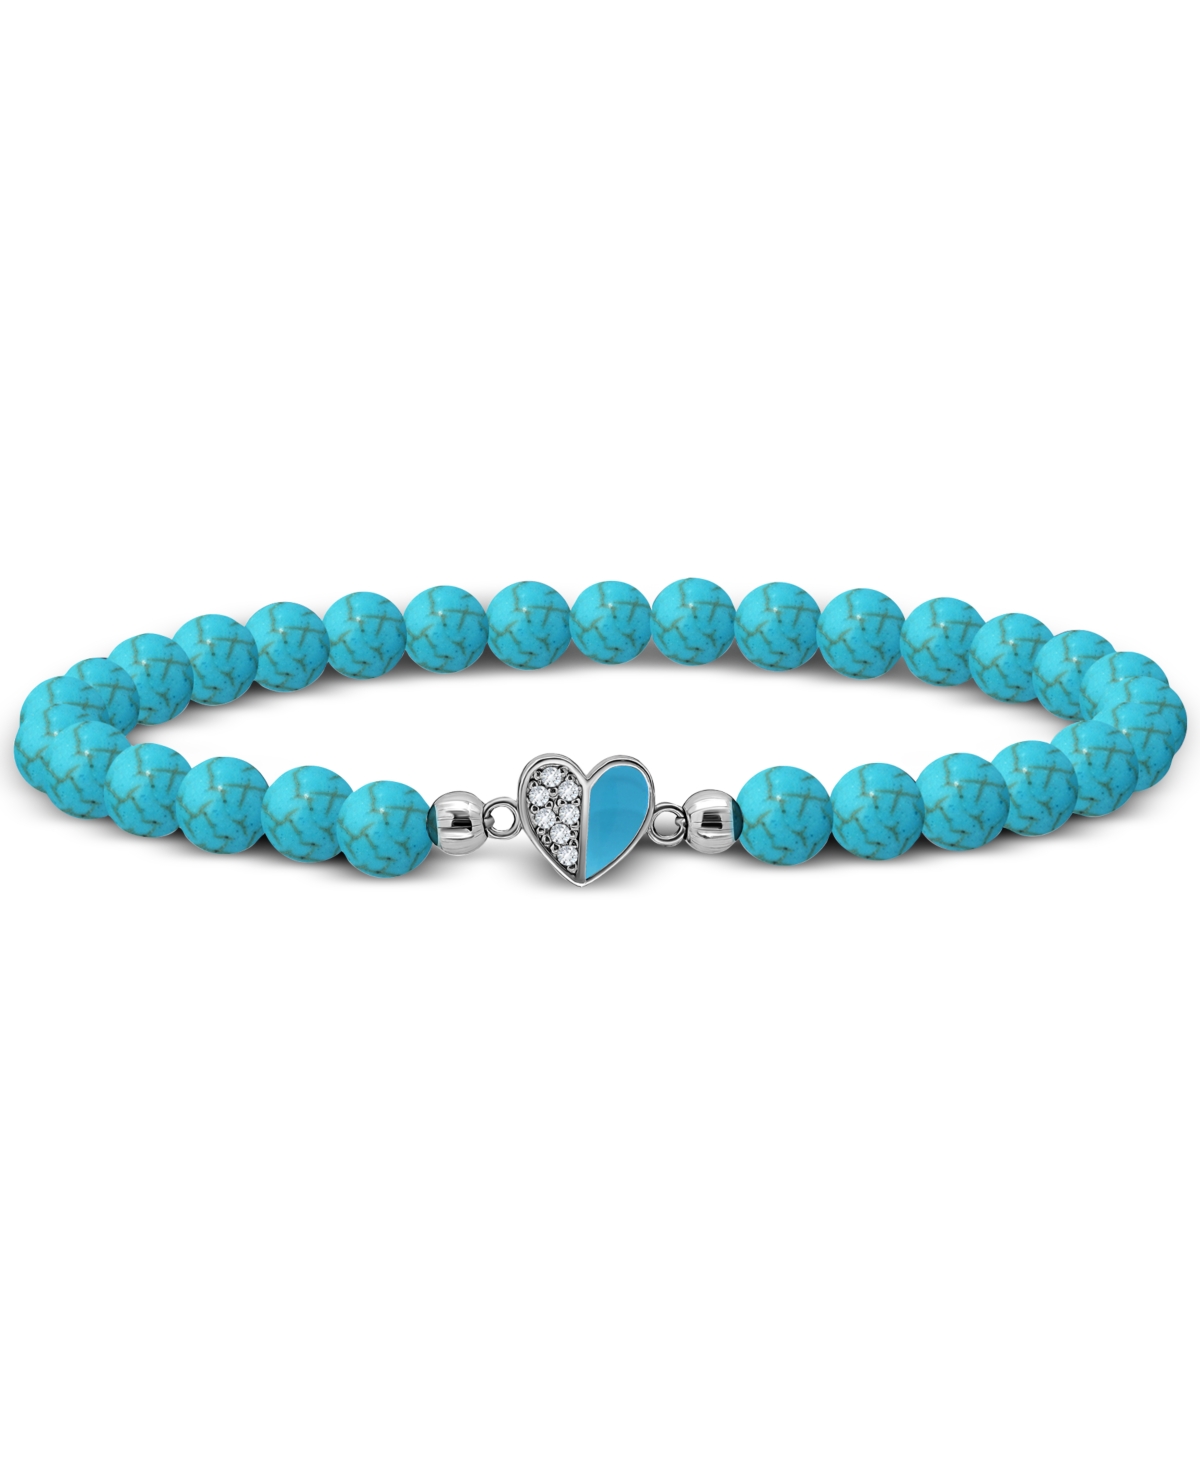 Howlite Chryscolla Bead & Cubic Zirconia Heart Stretch Bracelet, Created for Macy's - Gold